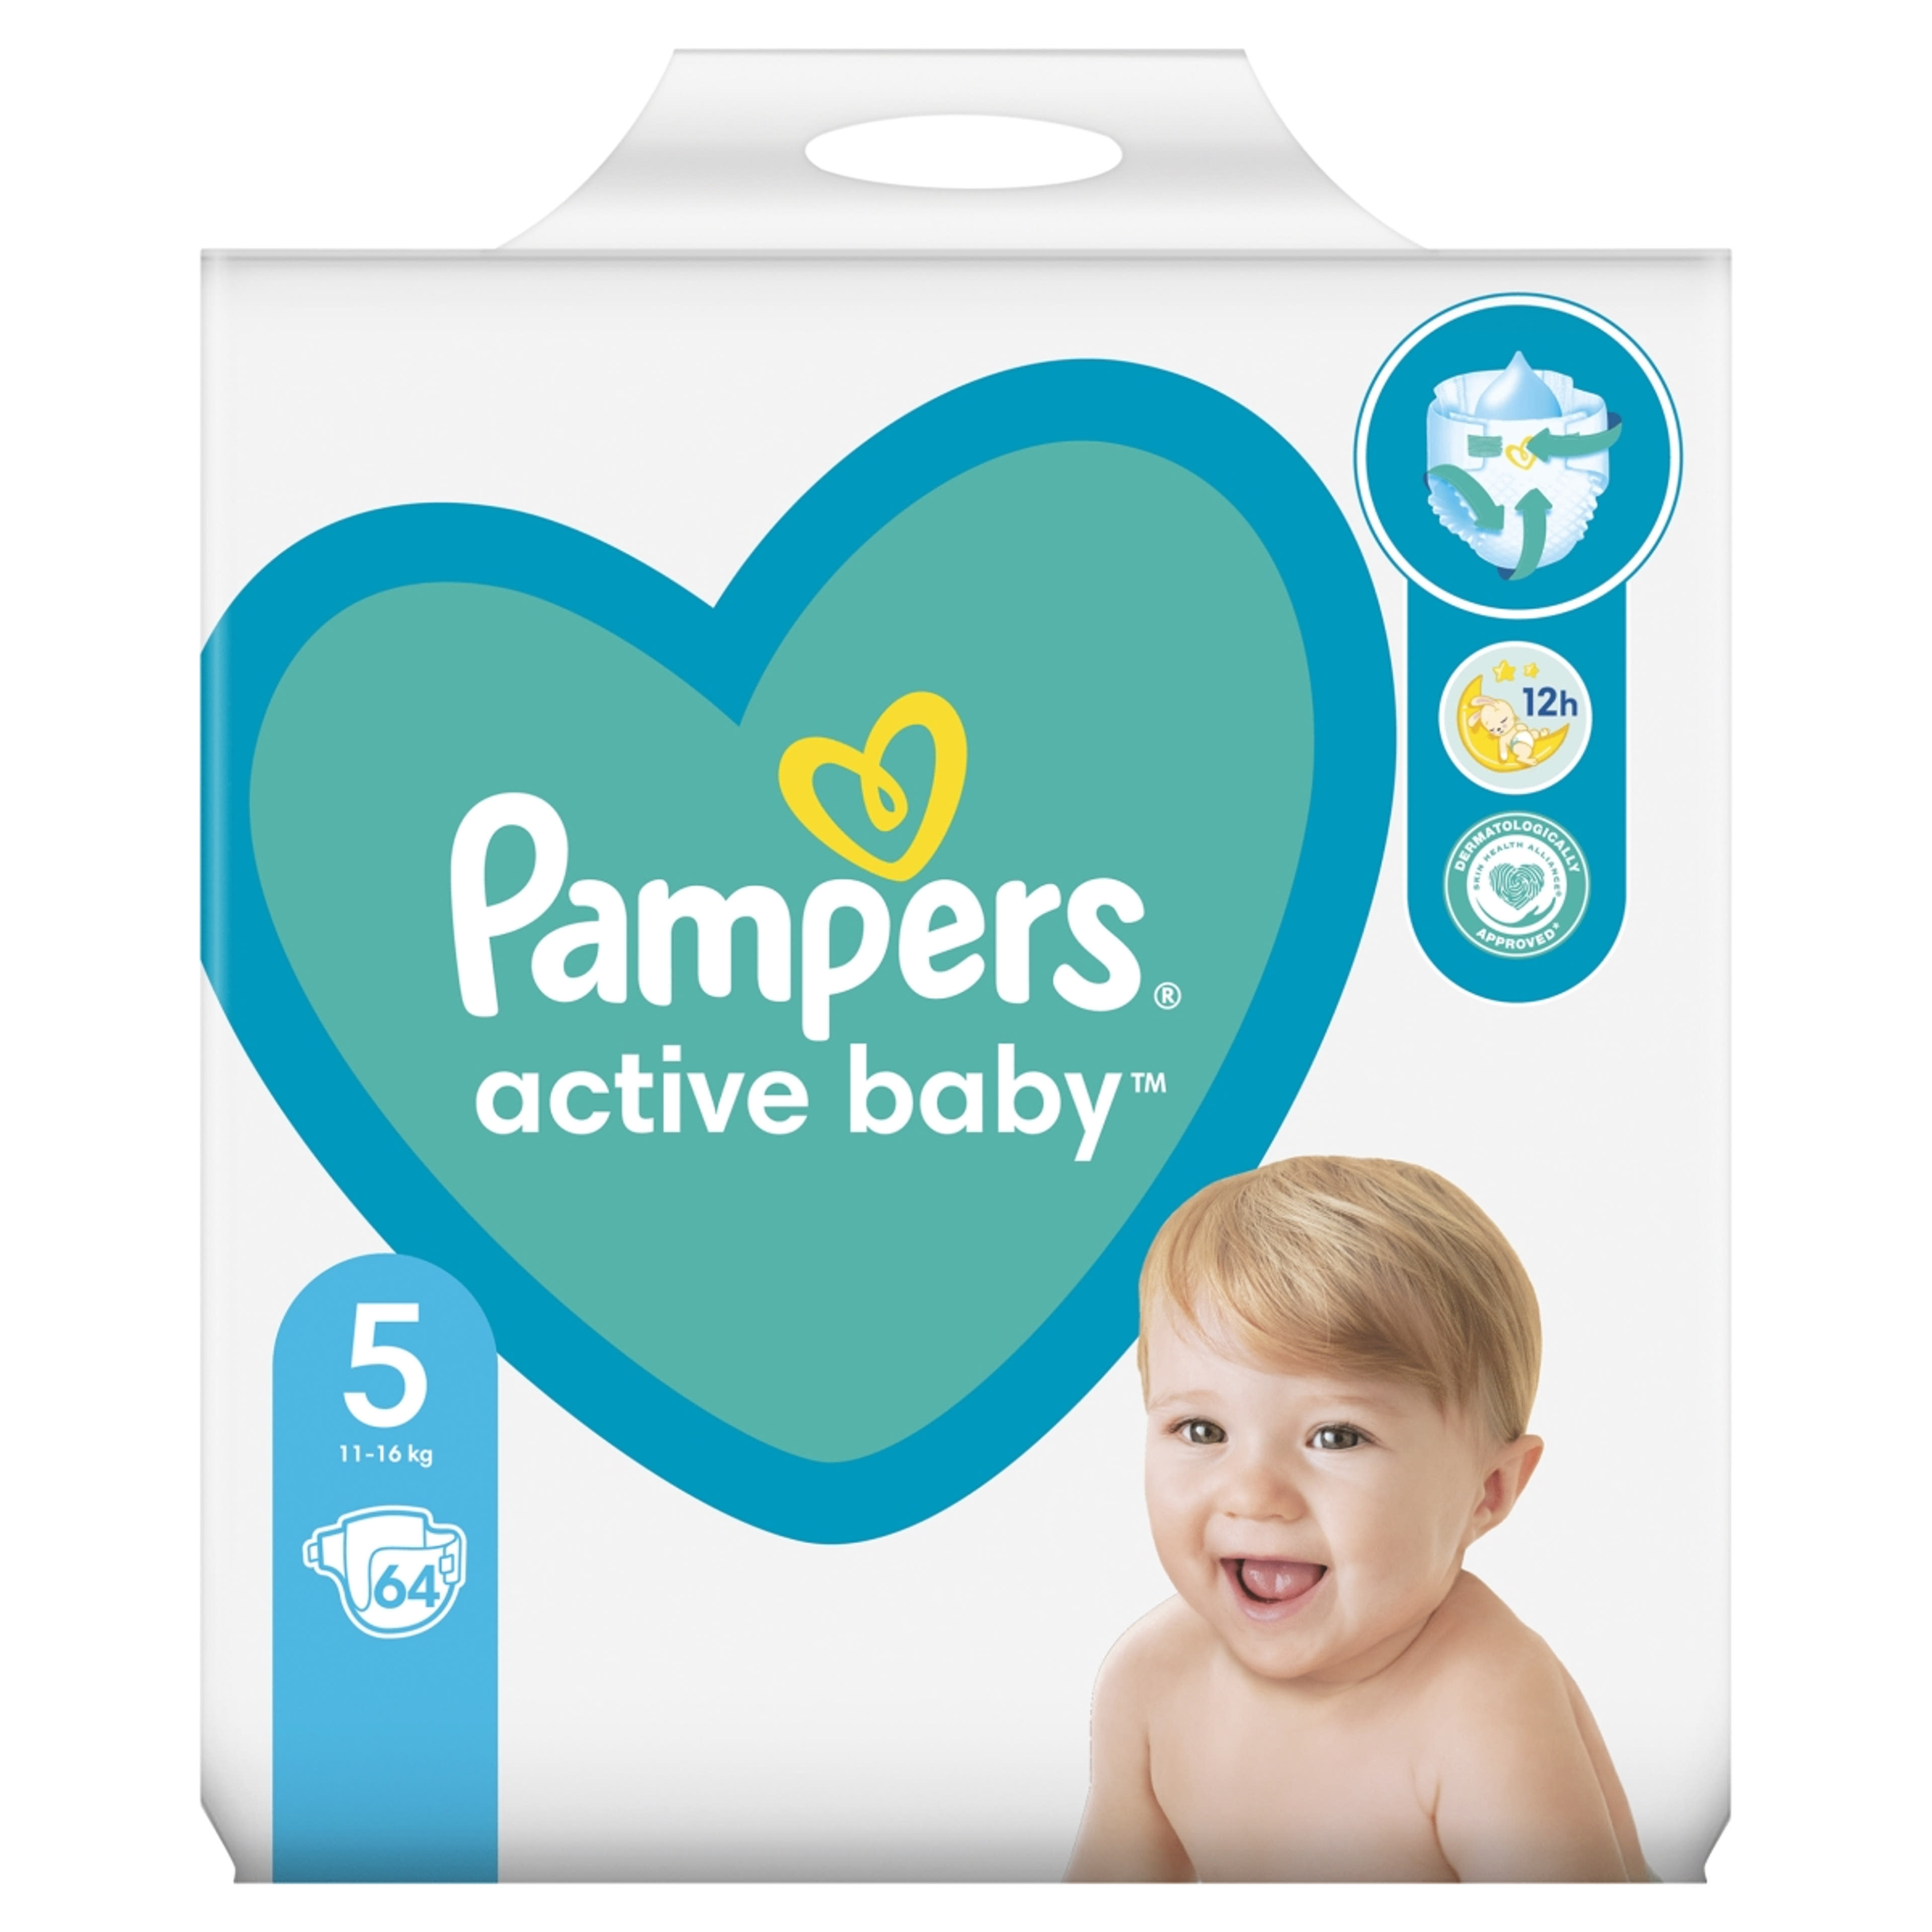 Pampers Active Baby Giant Pack Pelenka 5 - 64 db